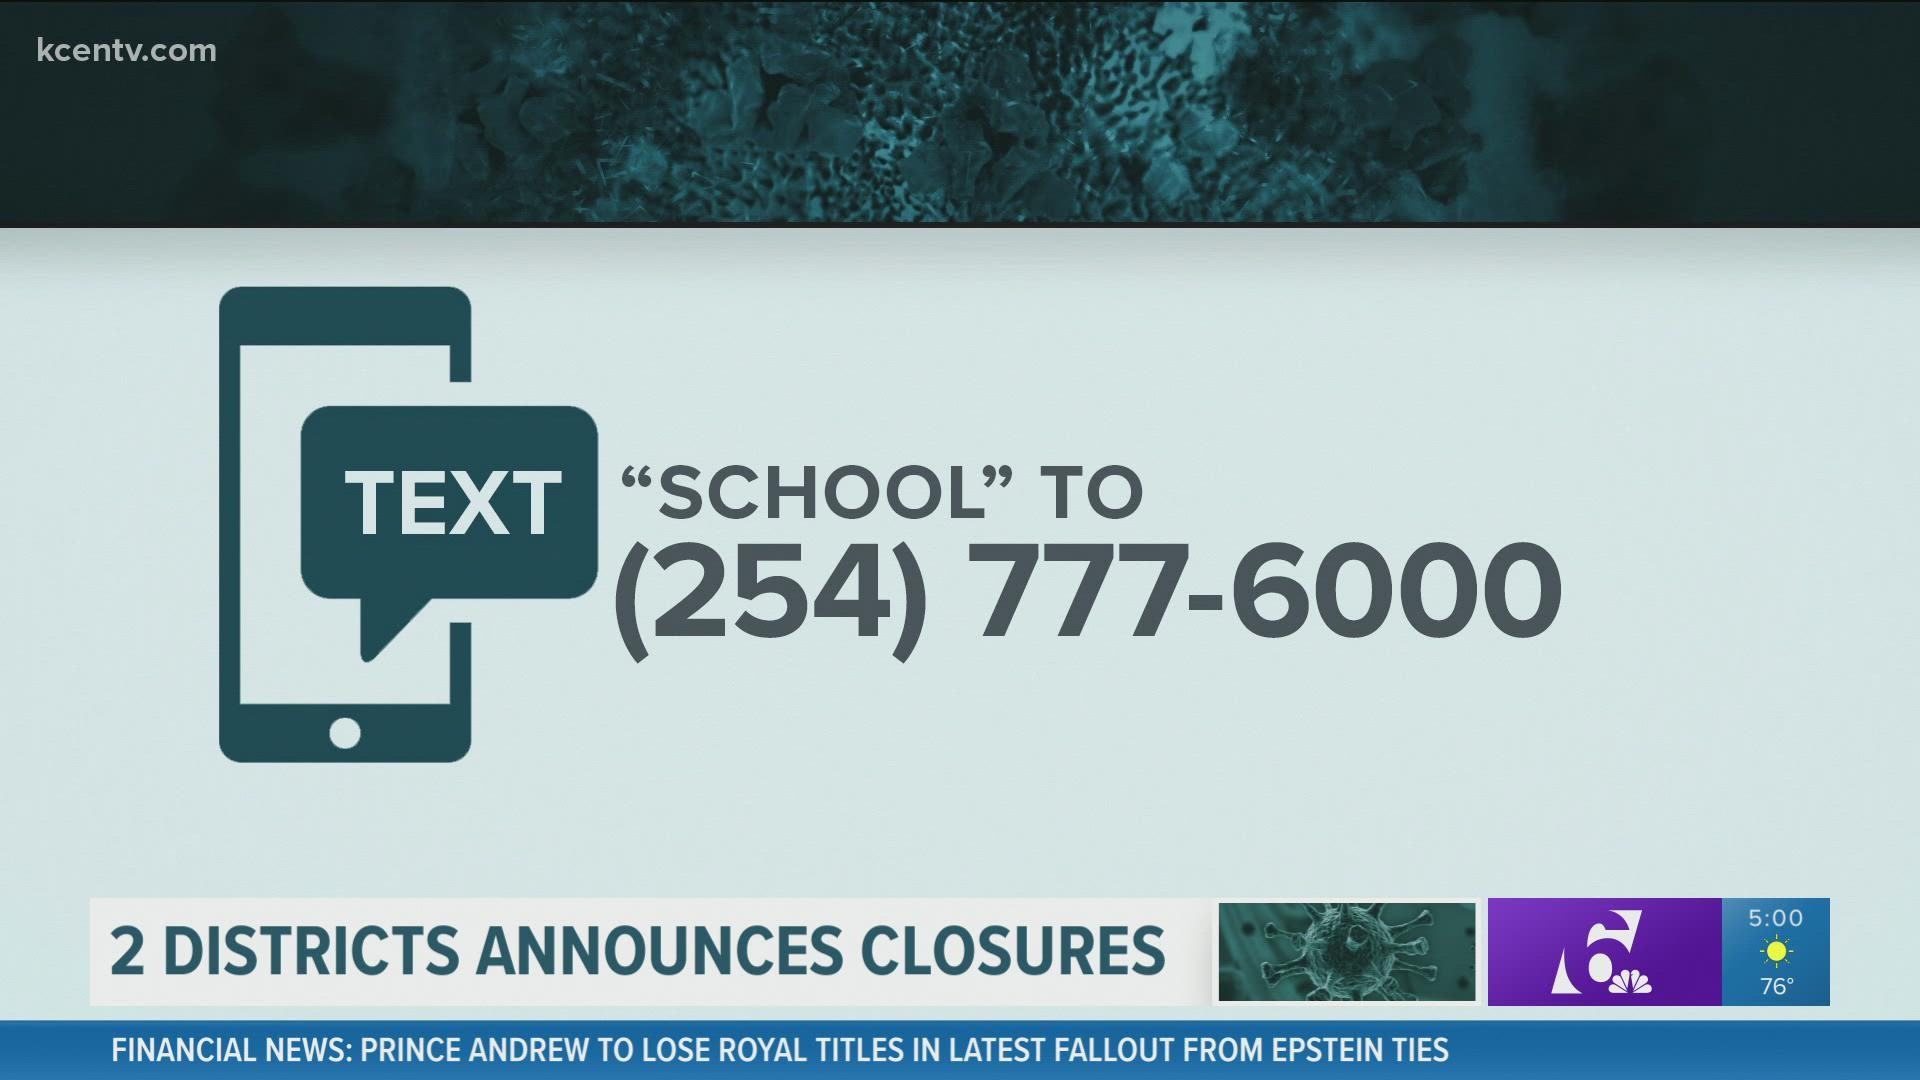 Mart and Golson ISD have announced school closures due to COVID.